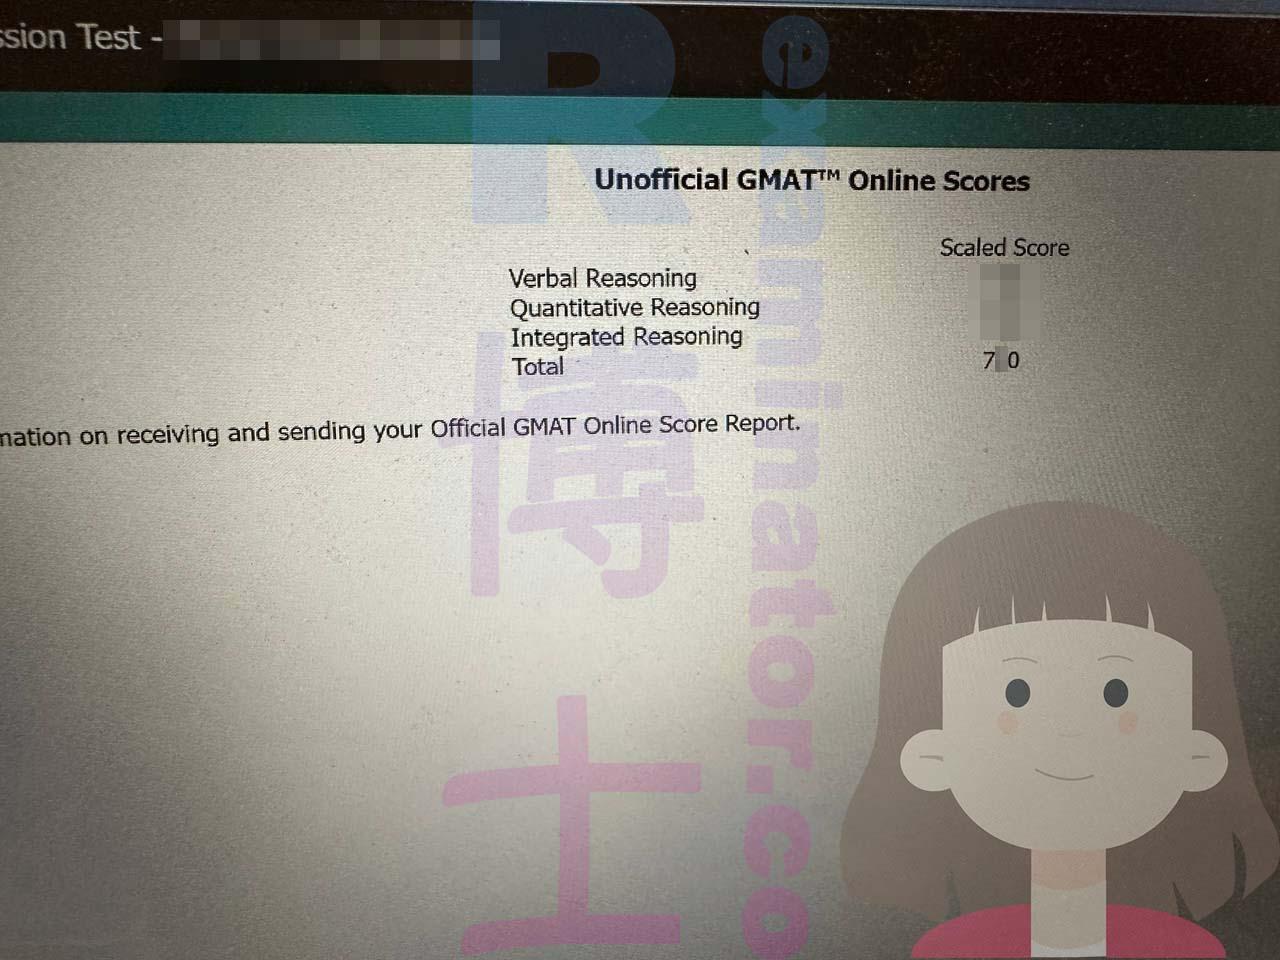 score image for GMAT Cheating success story #543